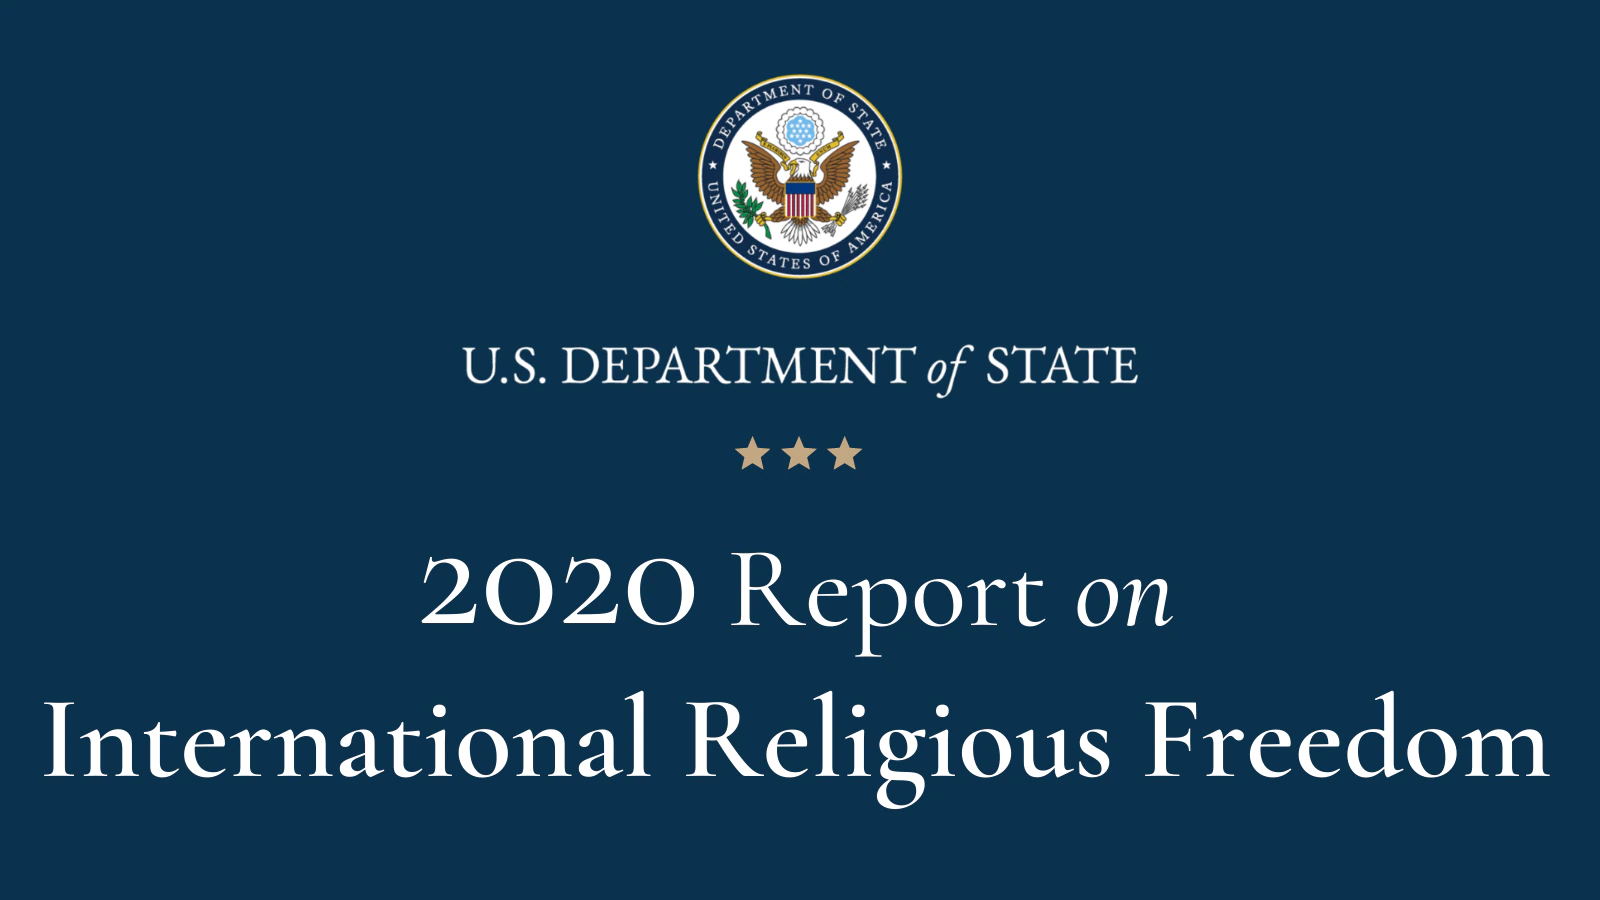 INTERNATIONAL RELIGIOUS FREEDOM CONCERNS OVER RELIGIOUS INTOLERANCE IN INDIA | US STATE DEPARTMENT